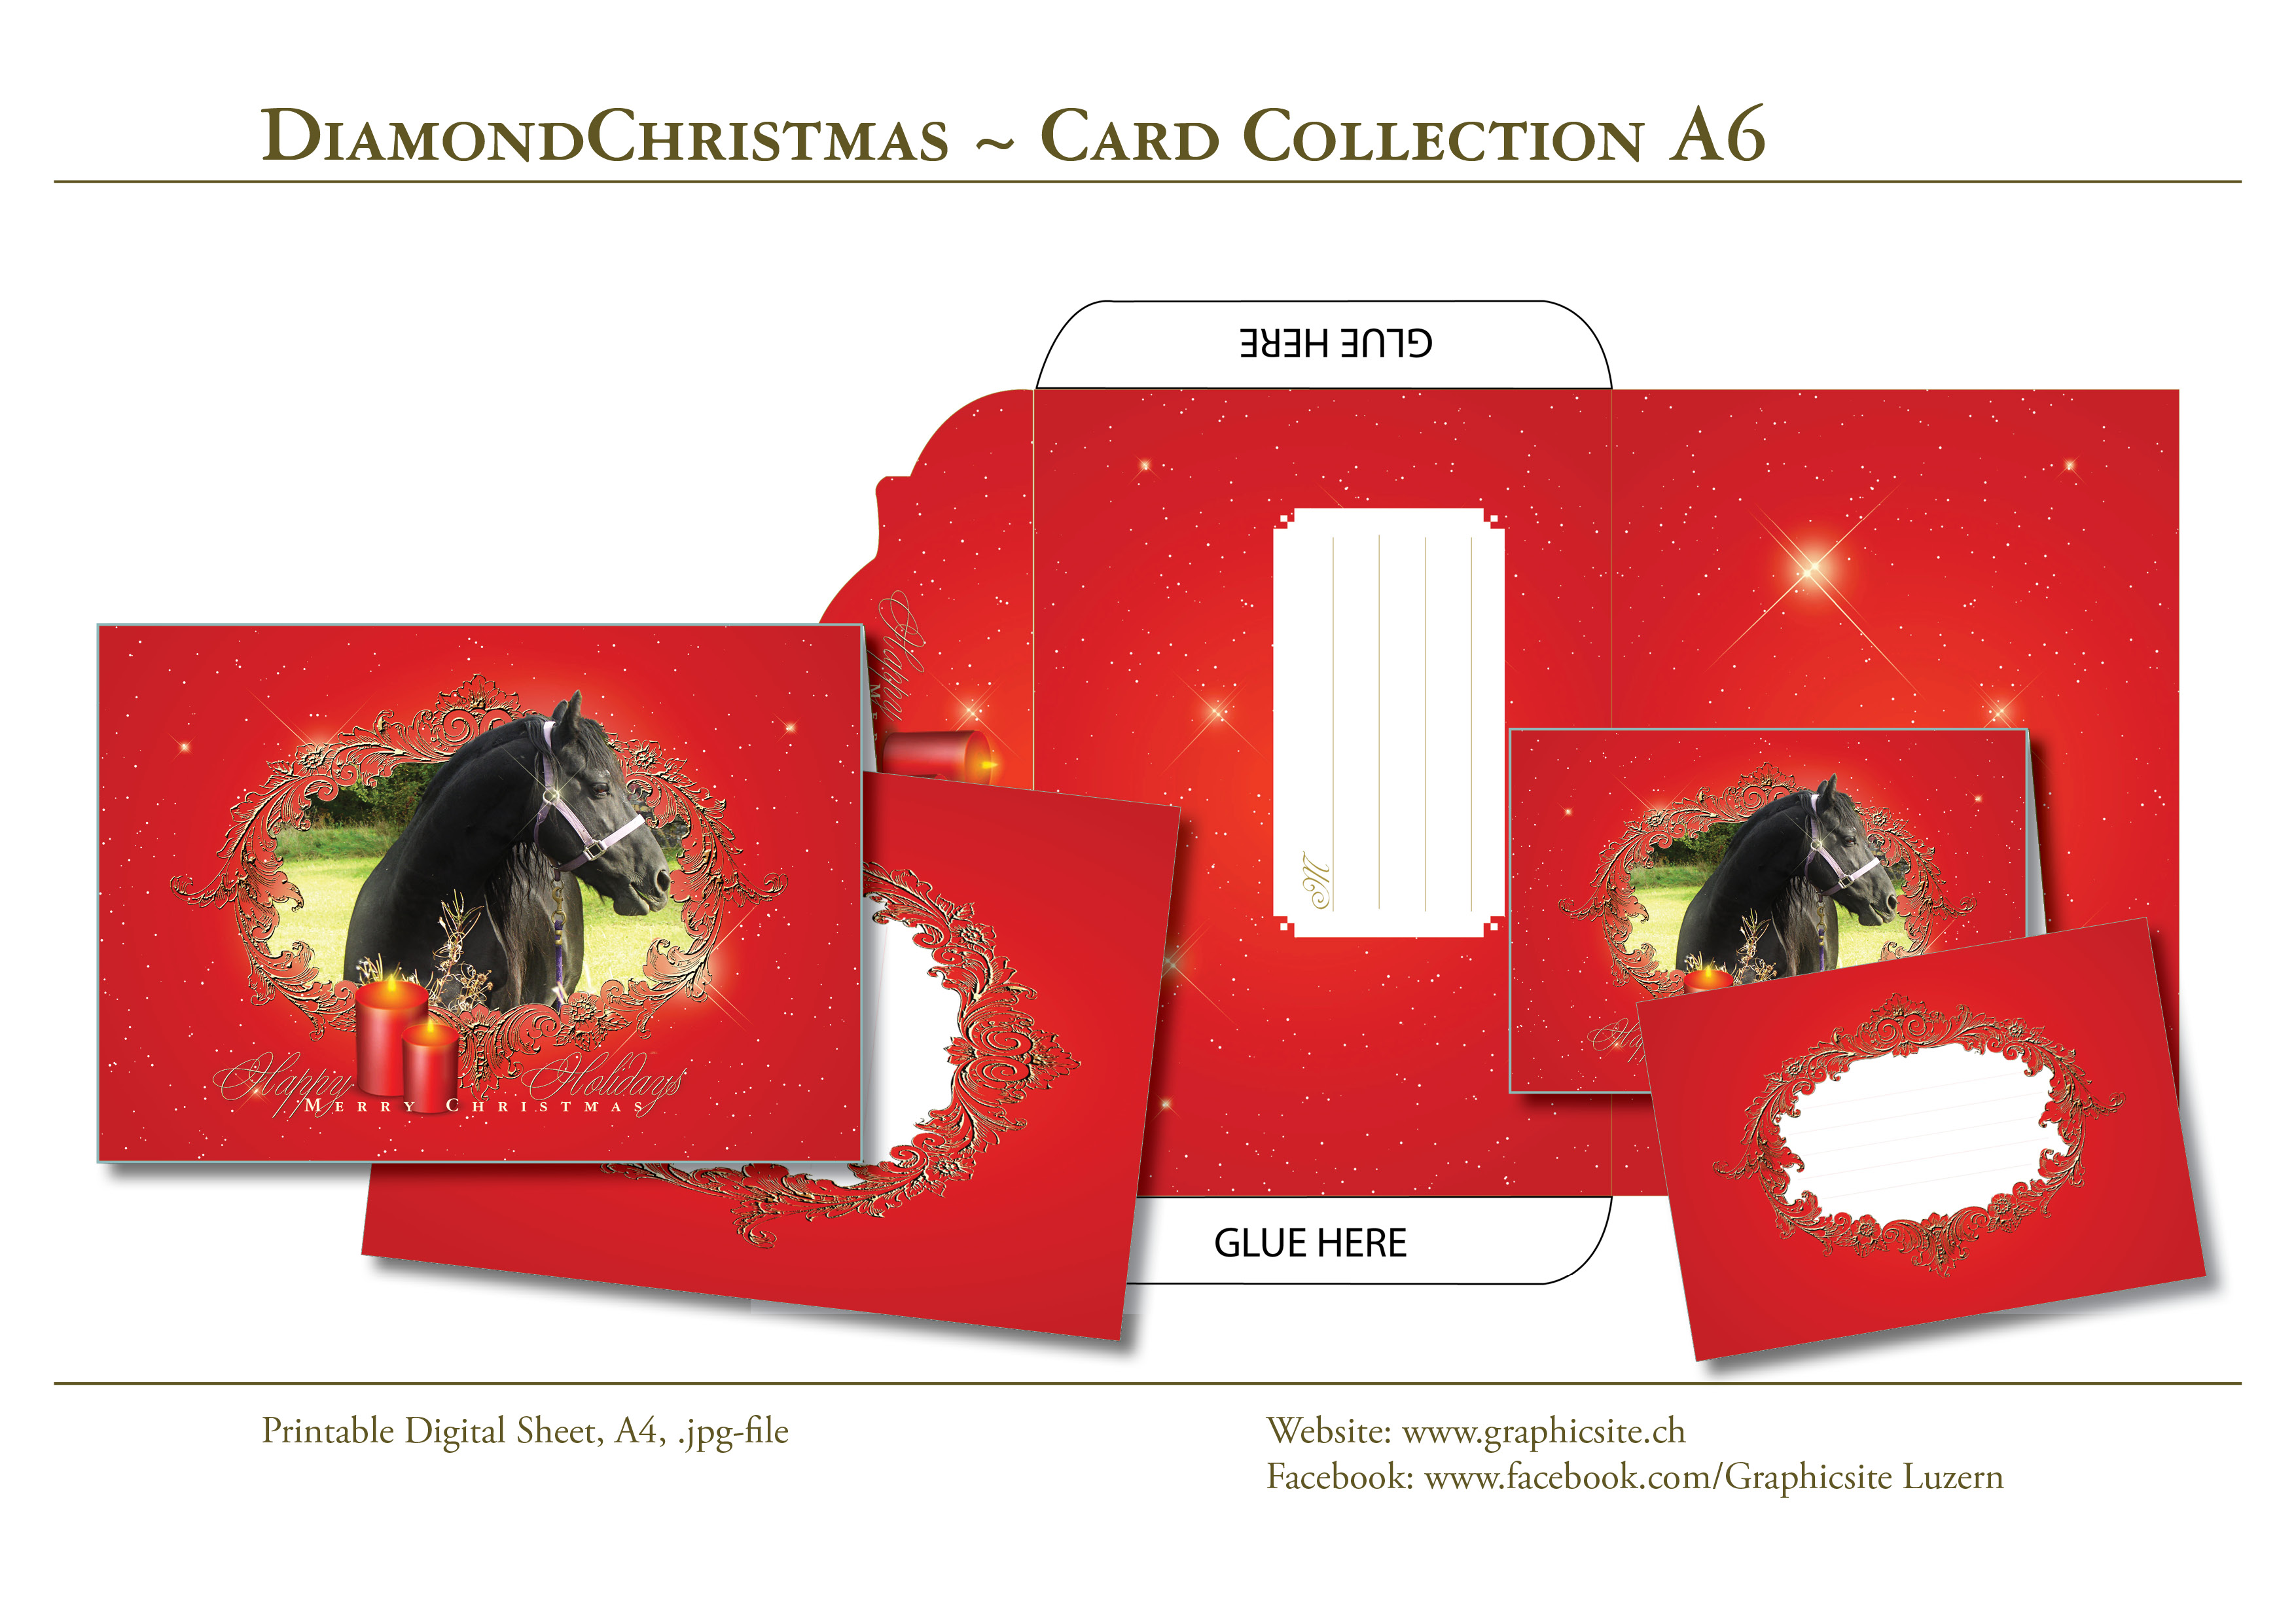 Printable Digital Sheets - DIN A-Files - Christmas Cards, Horse, Friesian, Animal, Greeting Cards, Envelope, Notecards, download, Graphic Design, Luzern